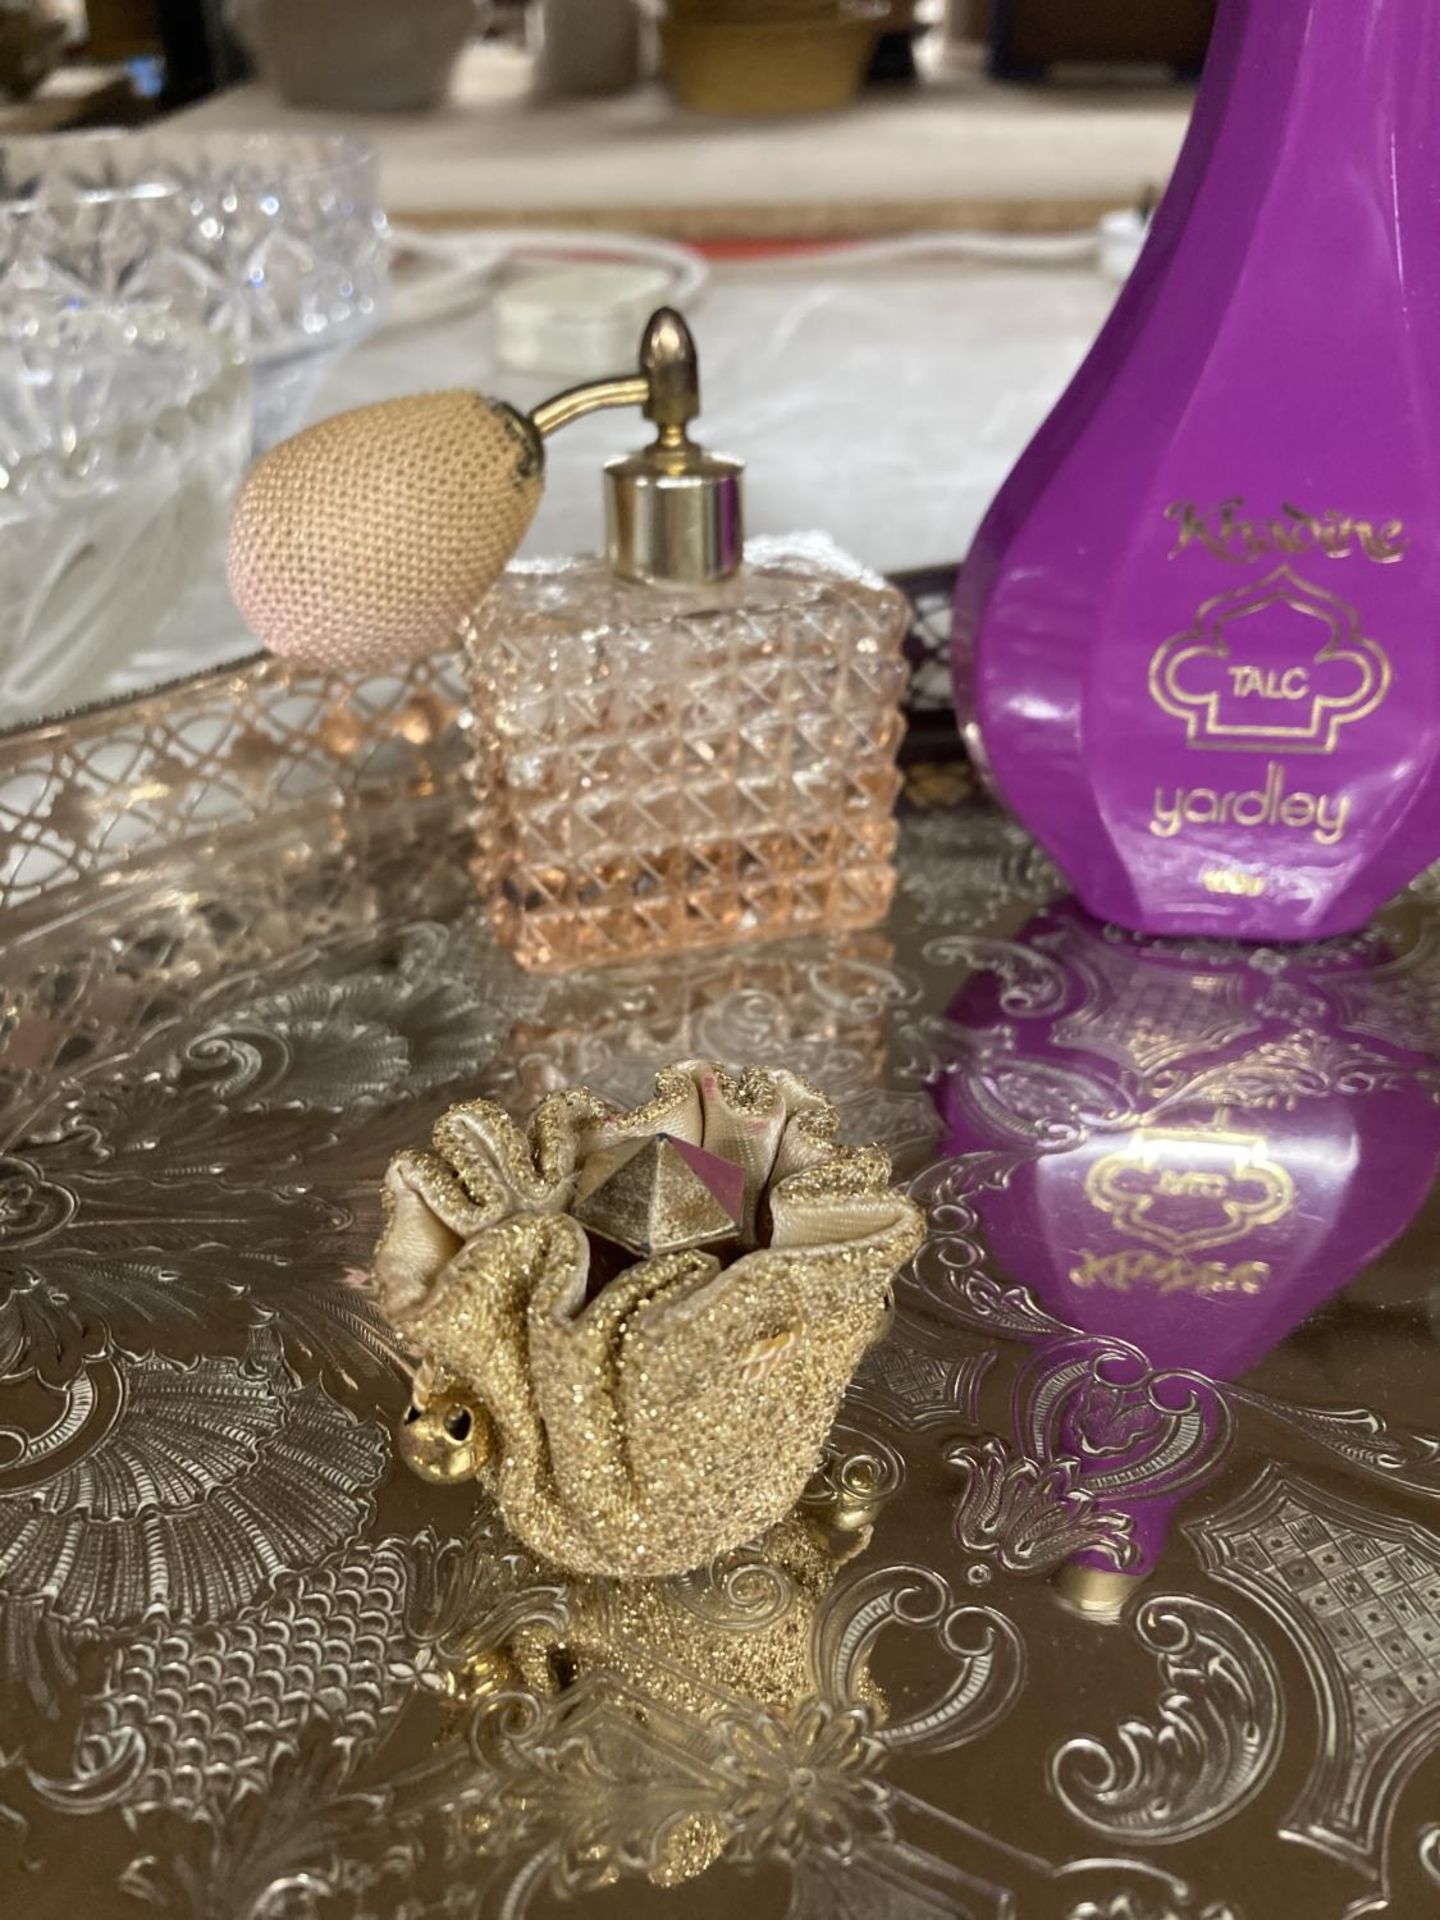 A SILVER PLATED GALLERIED TRAY CONTAINING VINTAGE PERFUMES, TALC AND A SCENT BOTTLE - Image 3 of 4